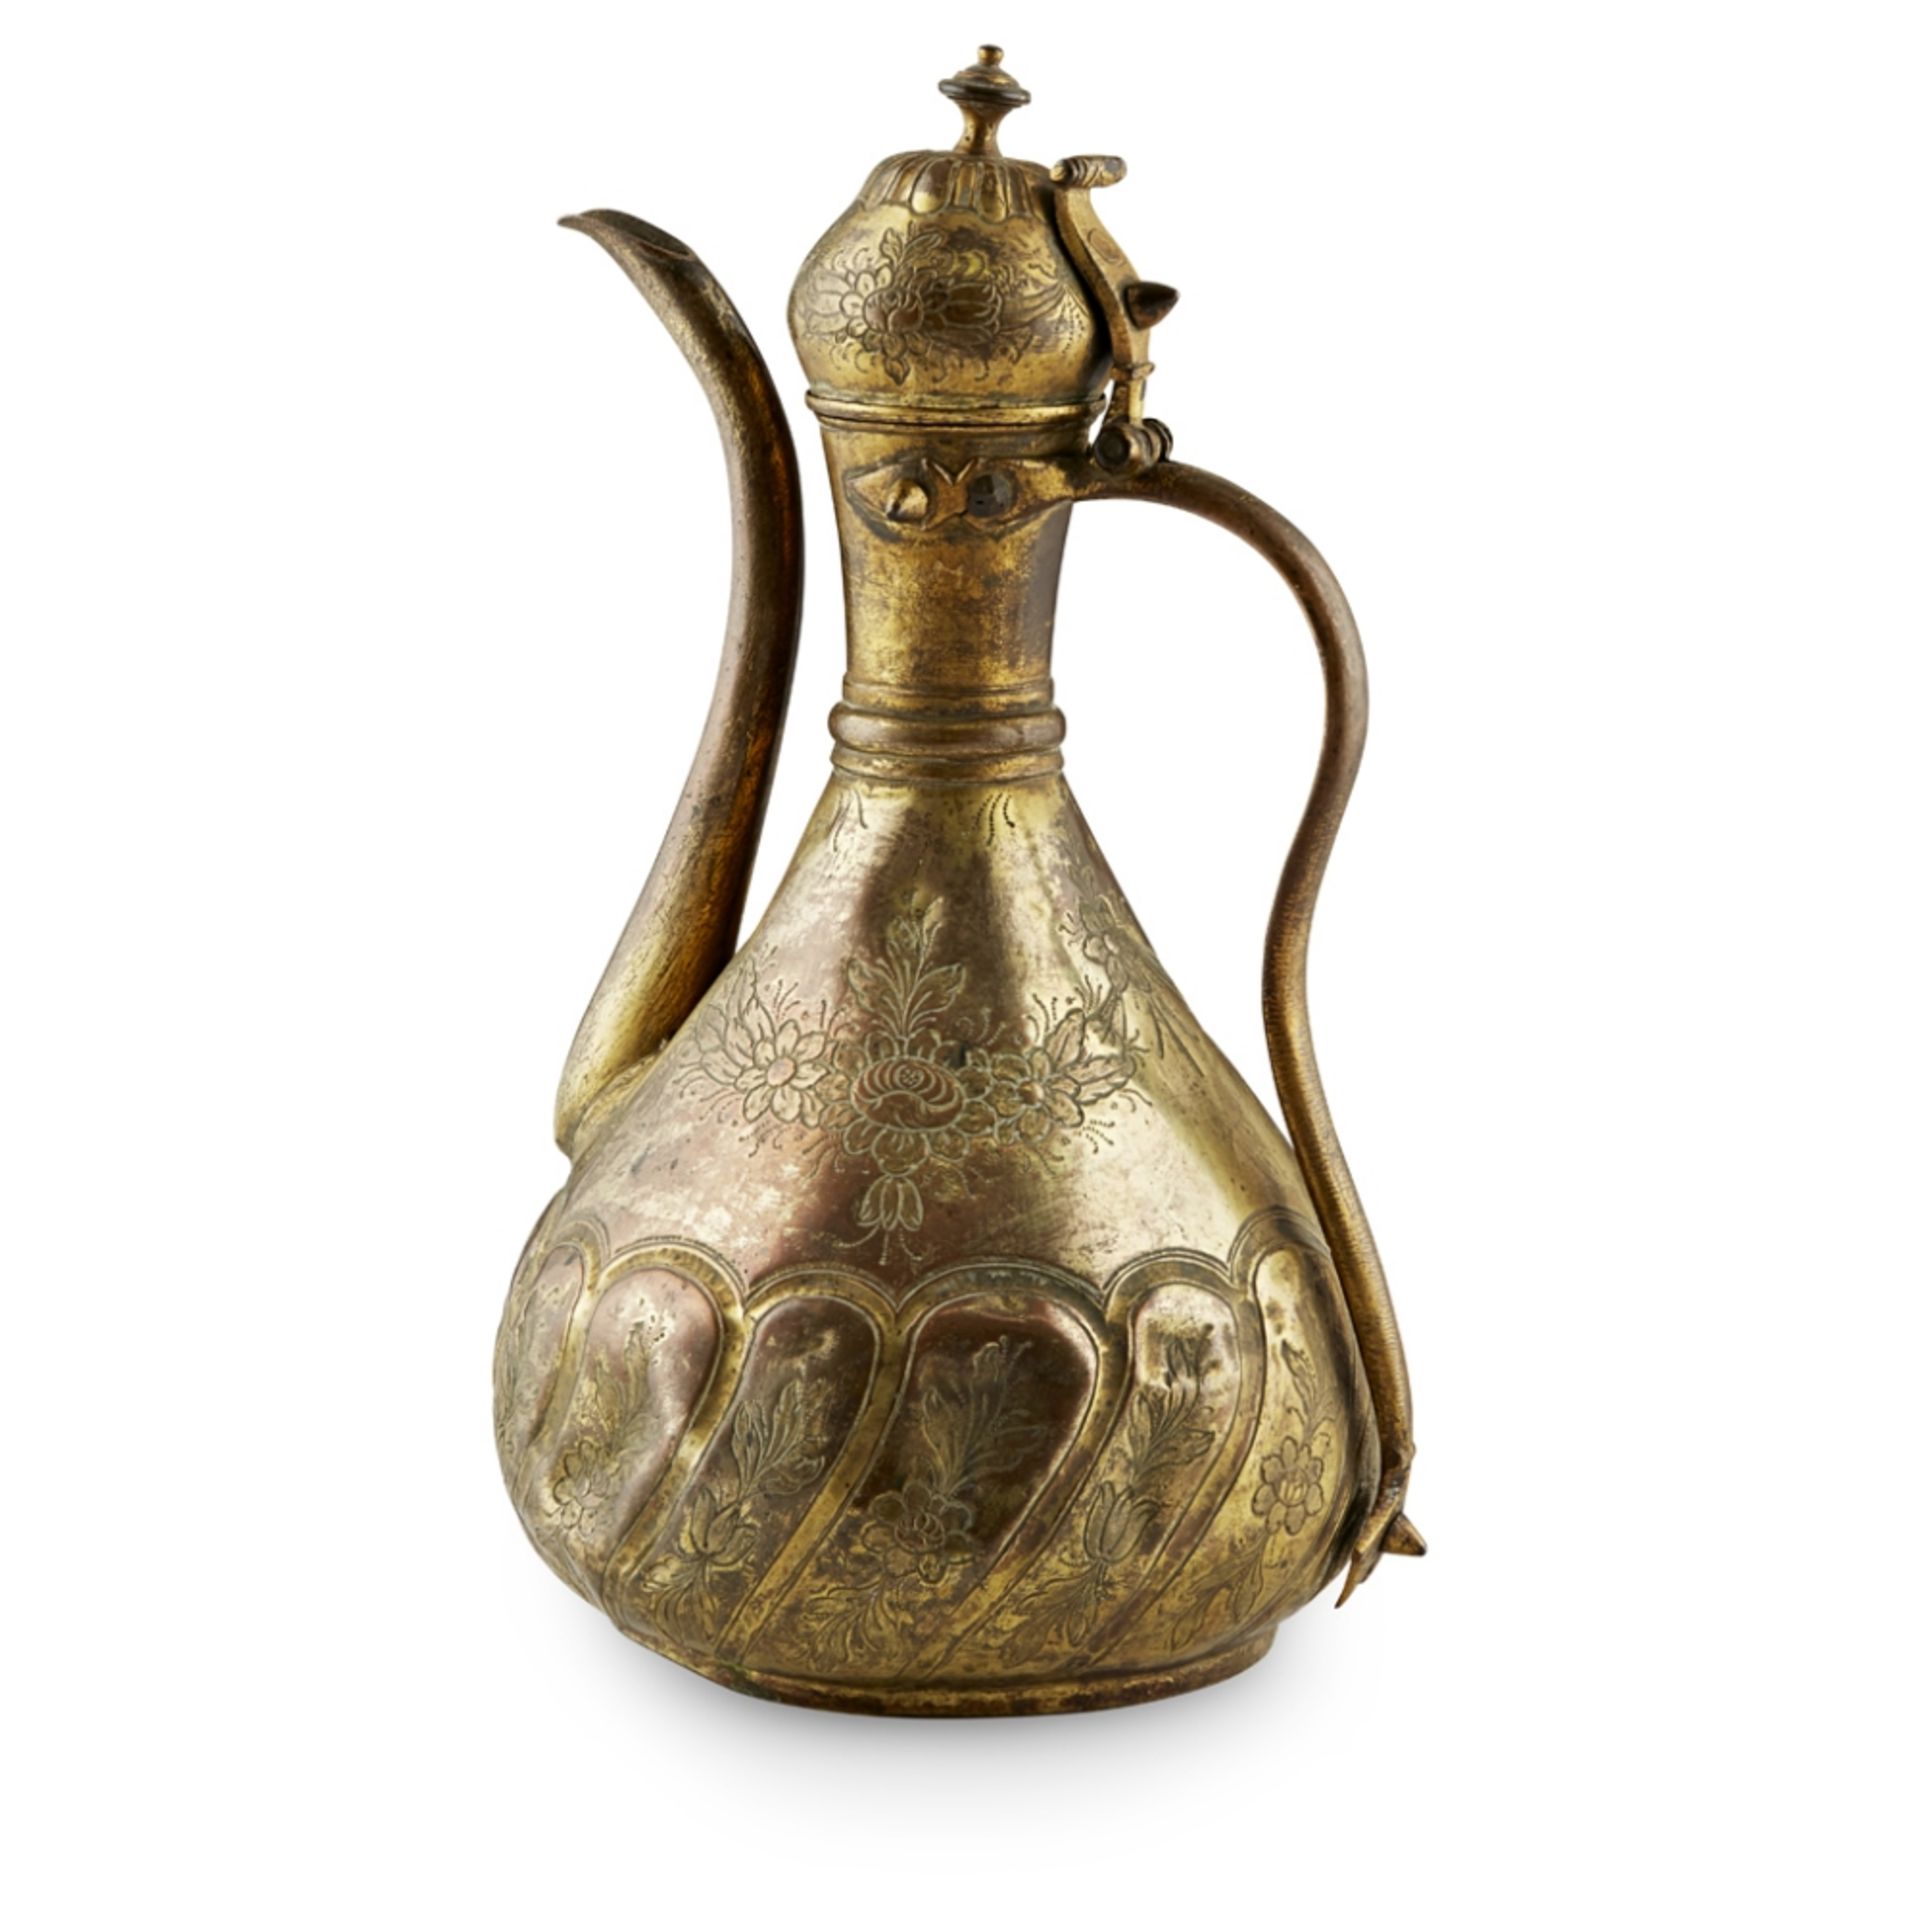 OTTOMAN GILT COPPER (TOMBAK) COVERED EWER18TH CENTURY the hinged domed cover above a curved handle